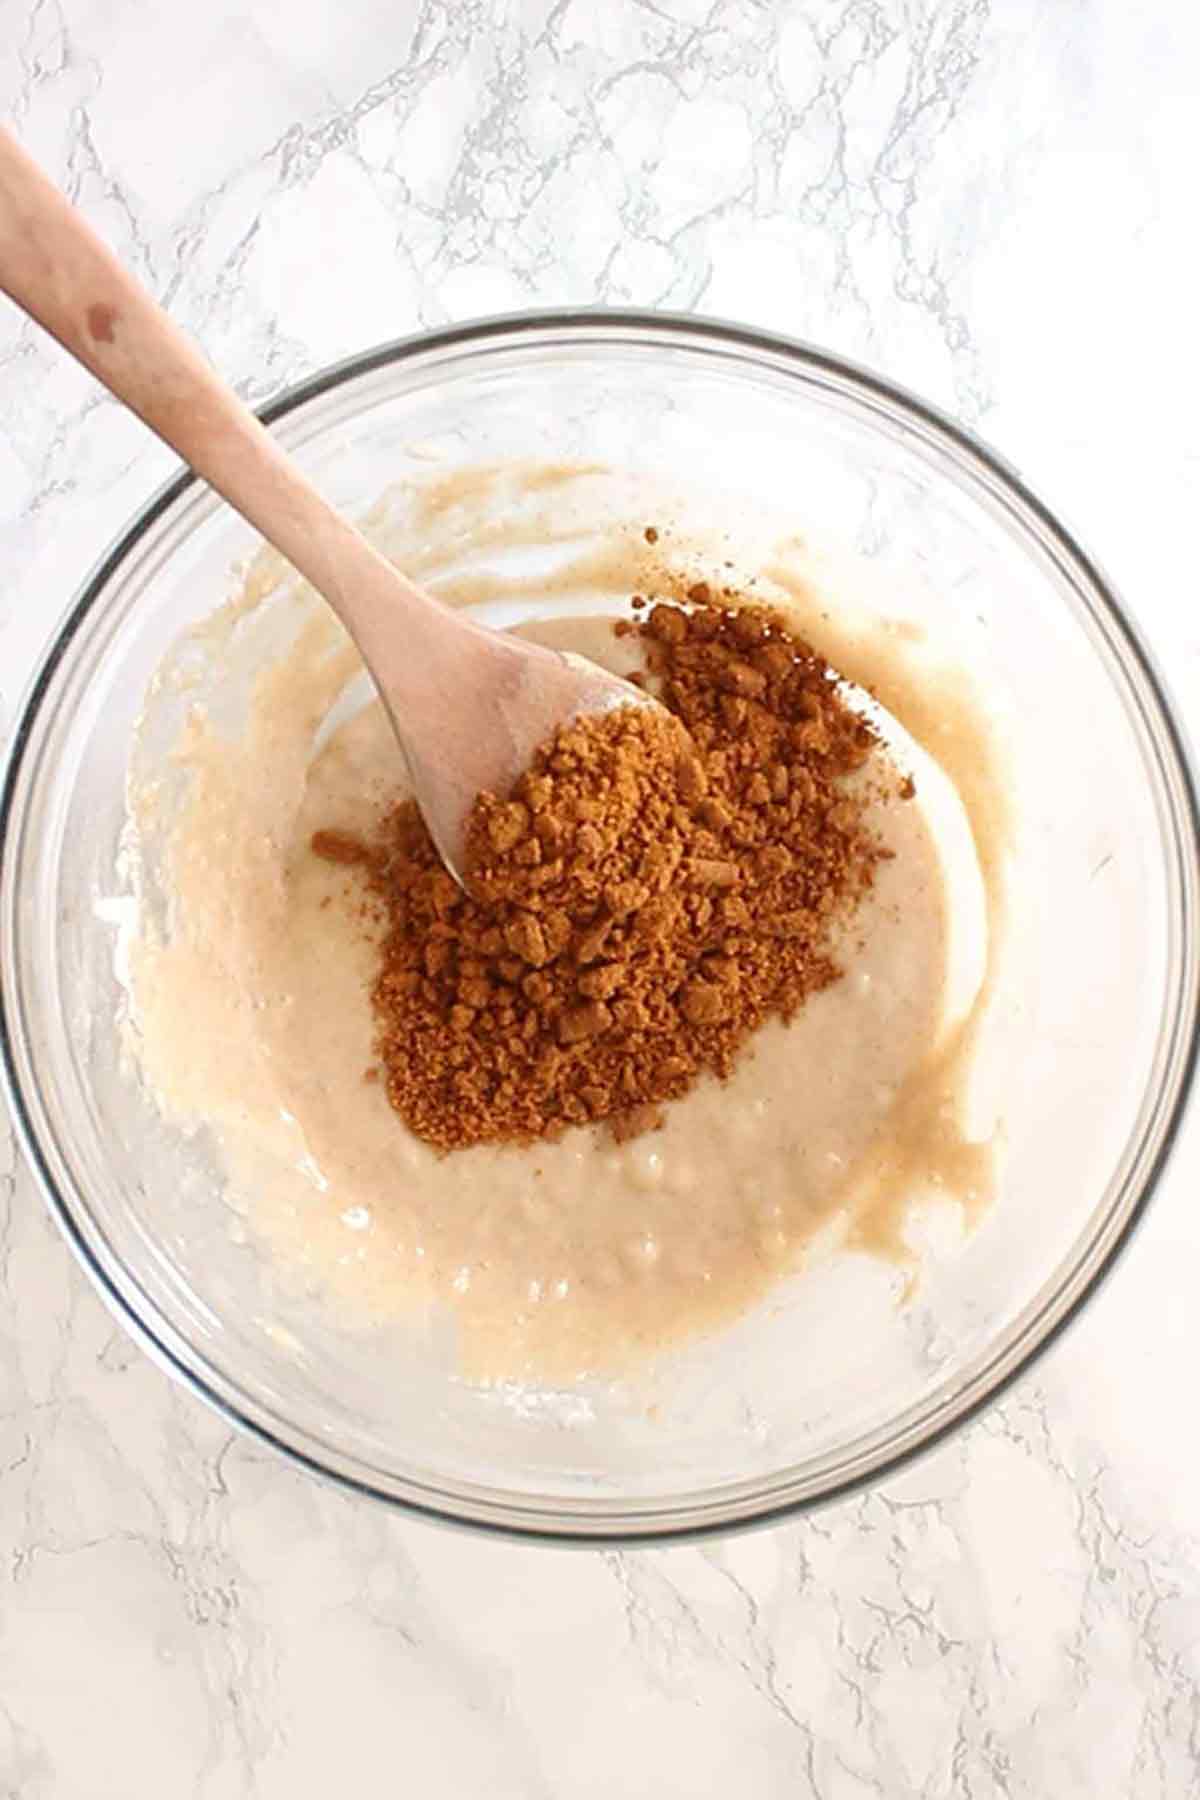 Adding Biscoff Crumbs To The Dairy Free Batter